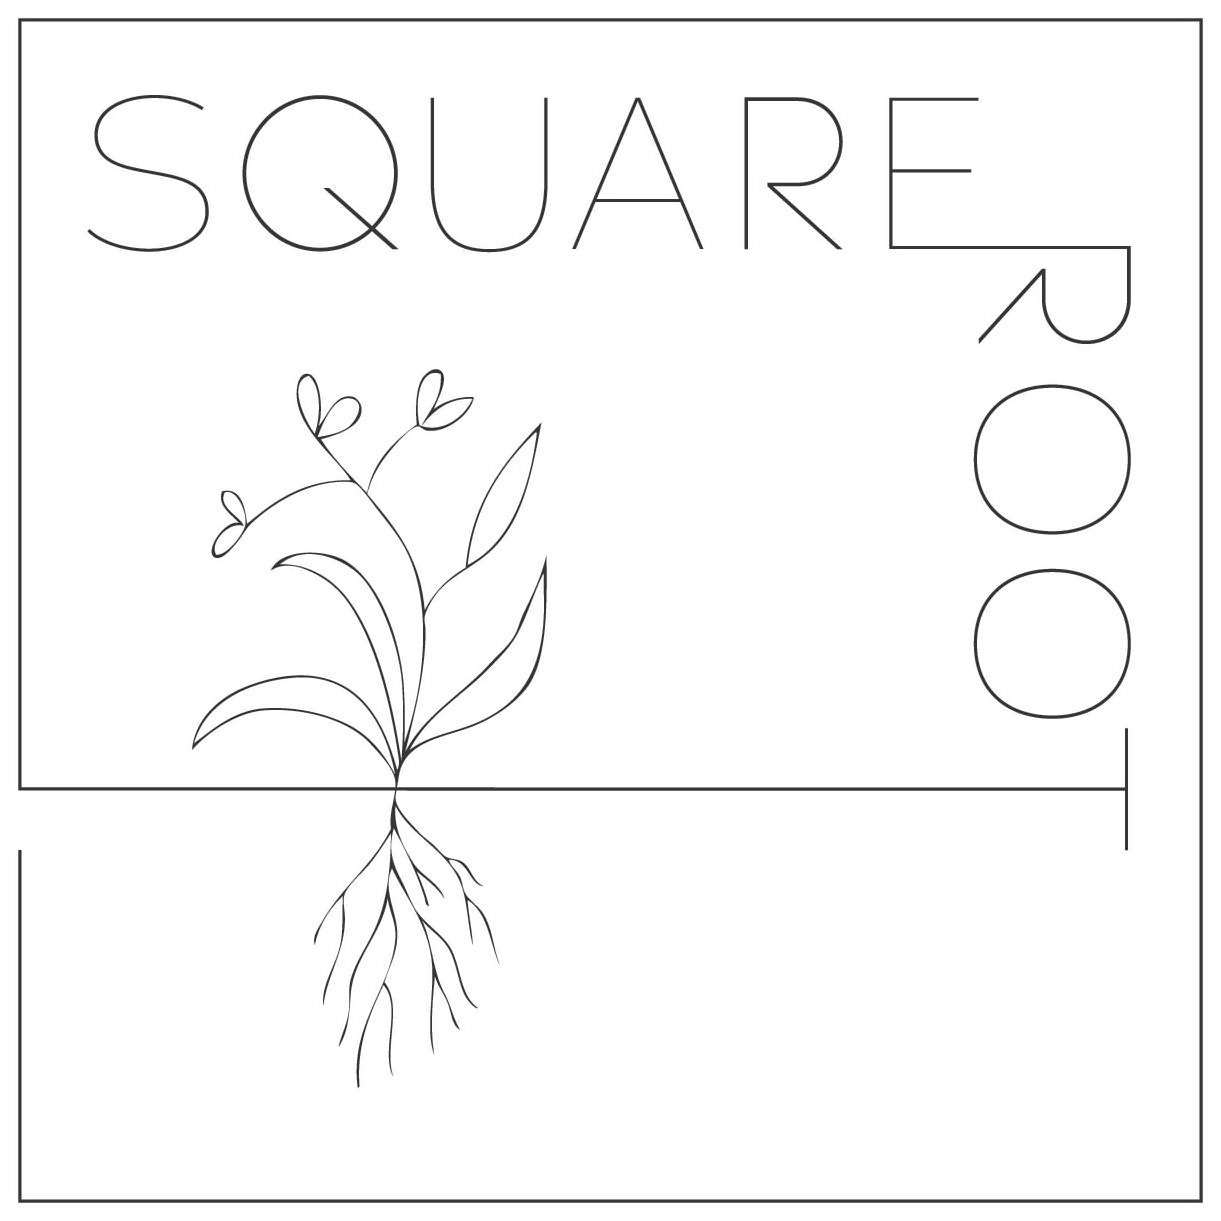 SQUARE ROOT